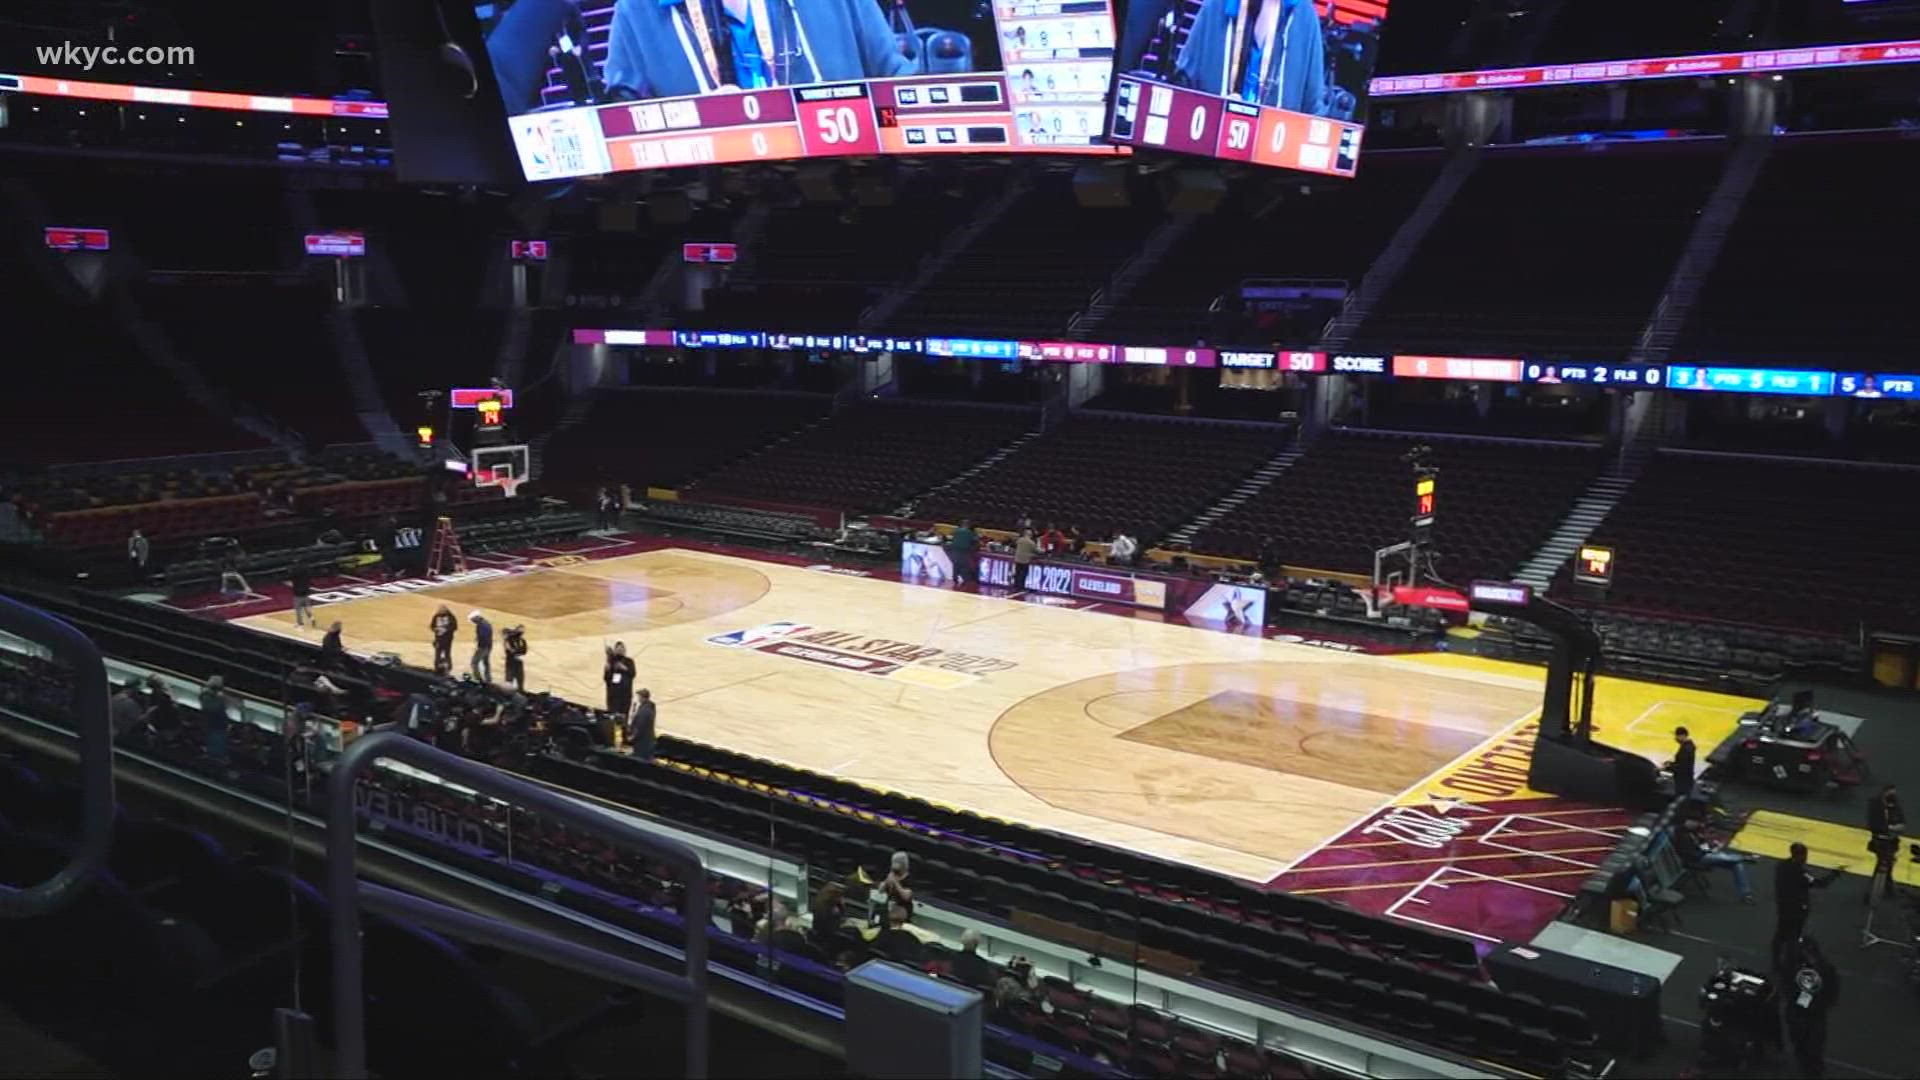 The 2022 NBA All-Star Weekend in Cleveland is just hours away from officially kicking off. Rocket Mortgage FieldHouse is ready.